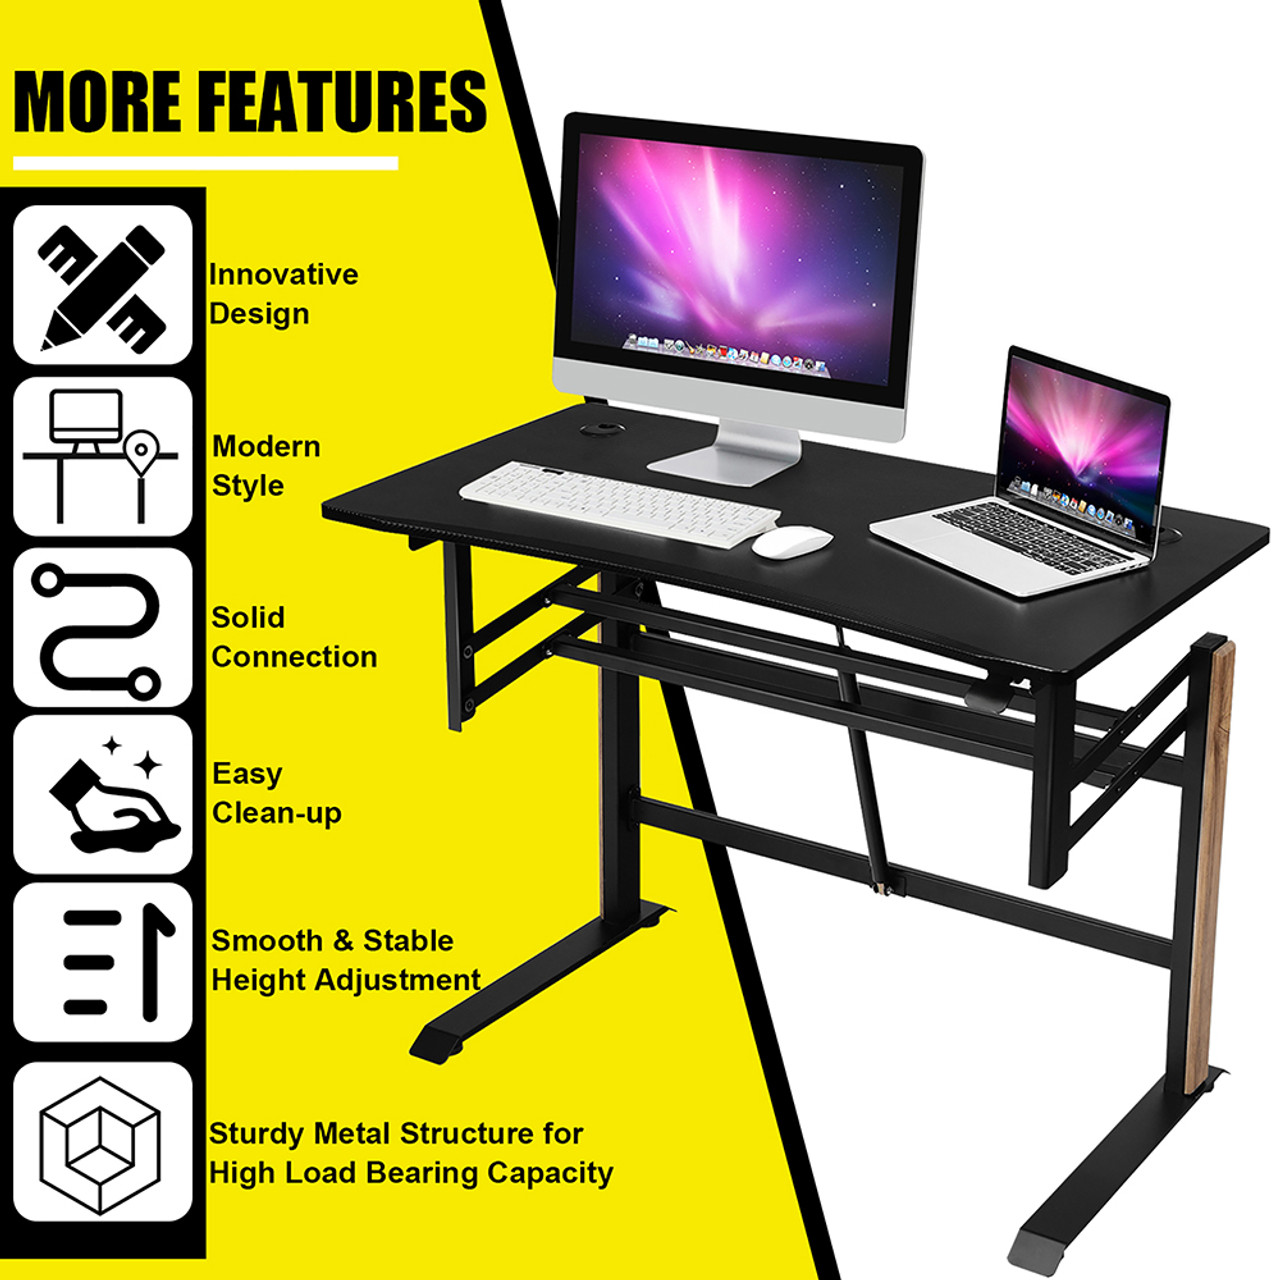 Pneumatic Height Adjustable Sit-to-Stand Desk product image